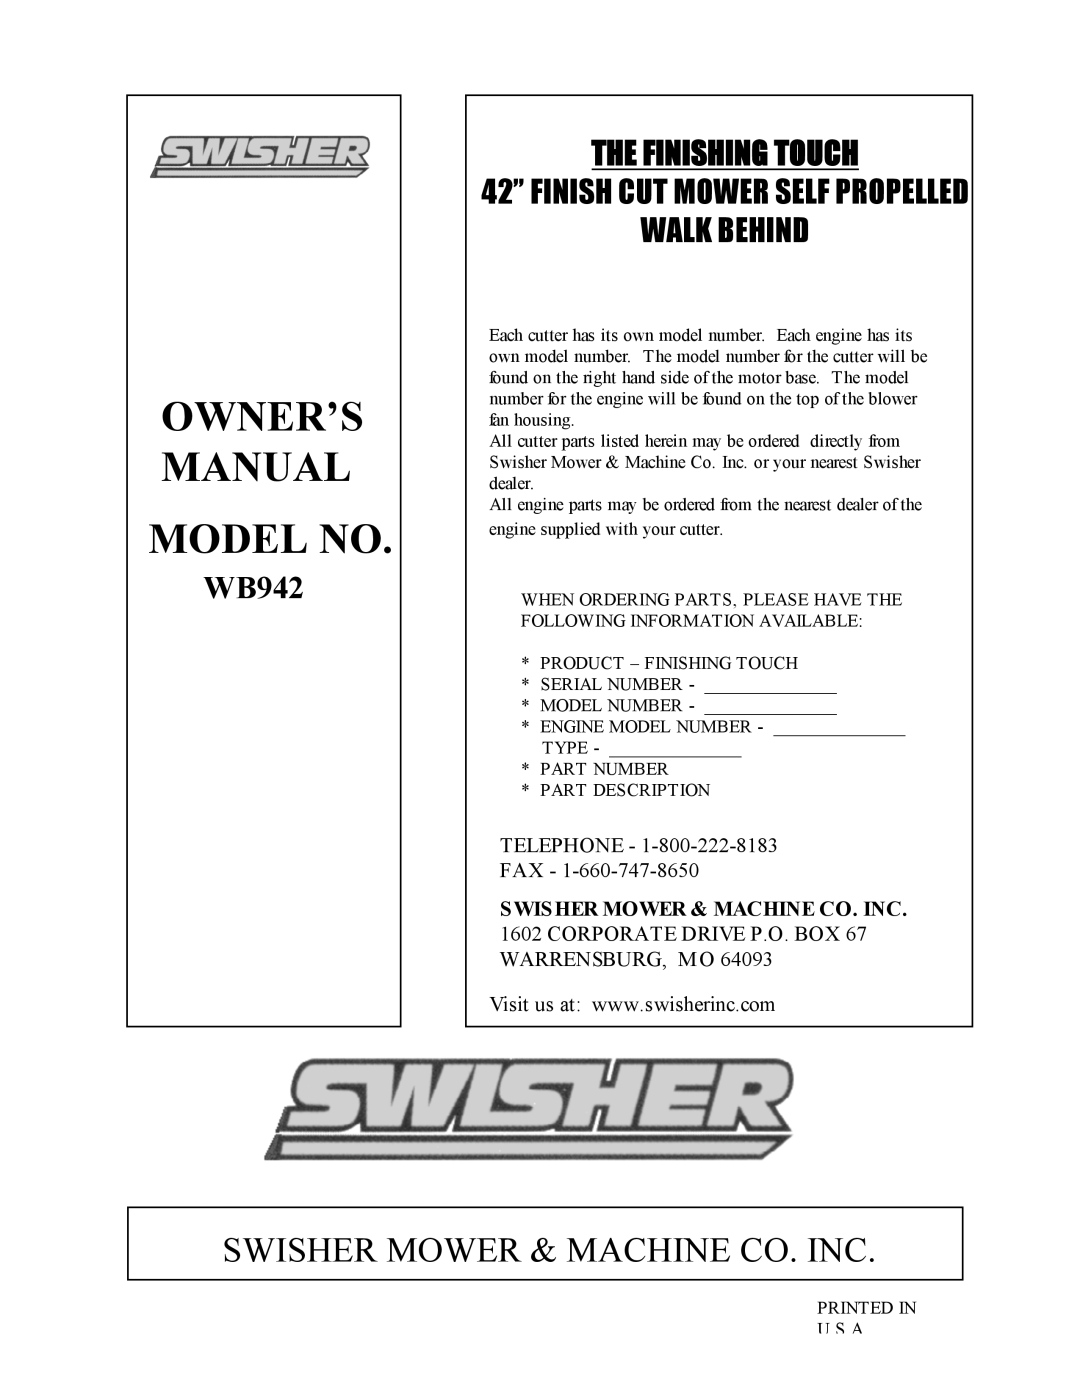 Swisher WB942 owner manual Telephone - Fax, Swisher Mower & Machine Co. Inc, The Finishing Touch 